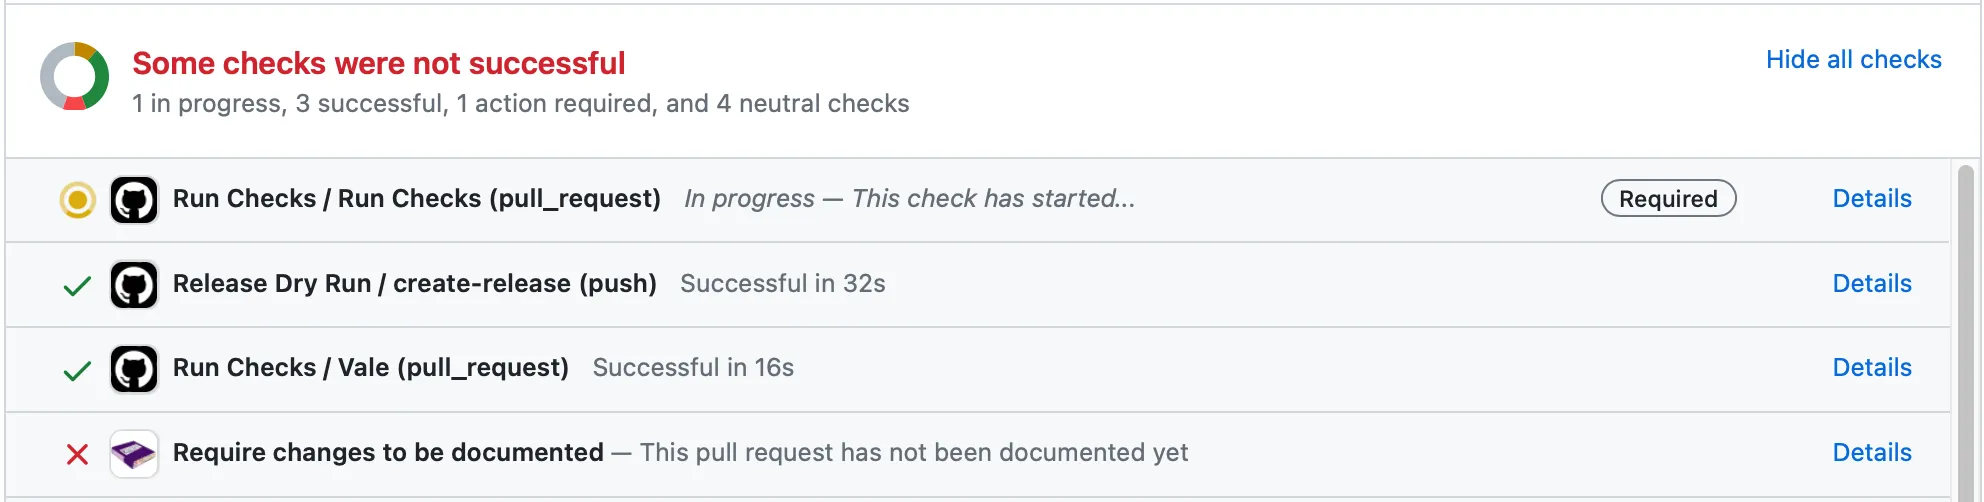 Screenshot of a GitHub pull request with a failing status check entitled "Require changes to be documented"